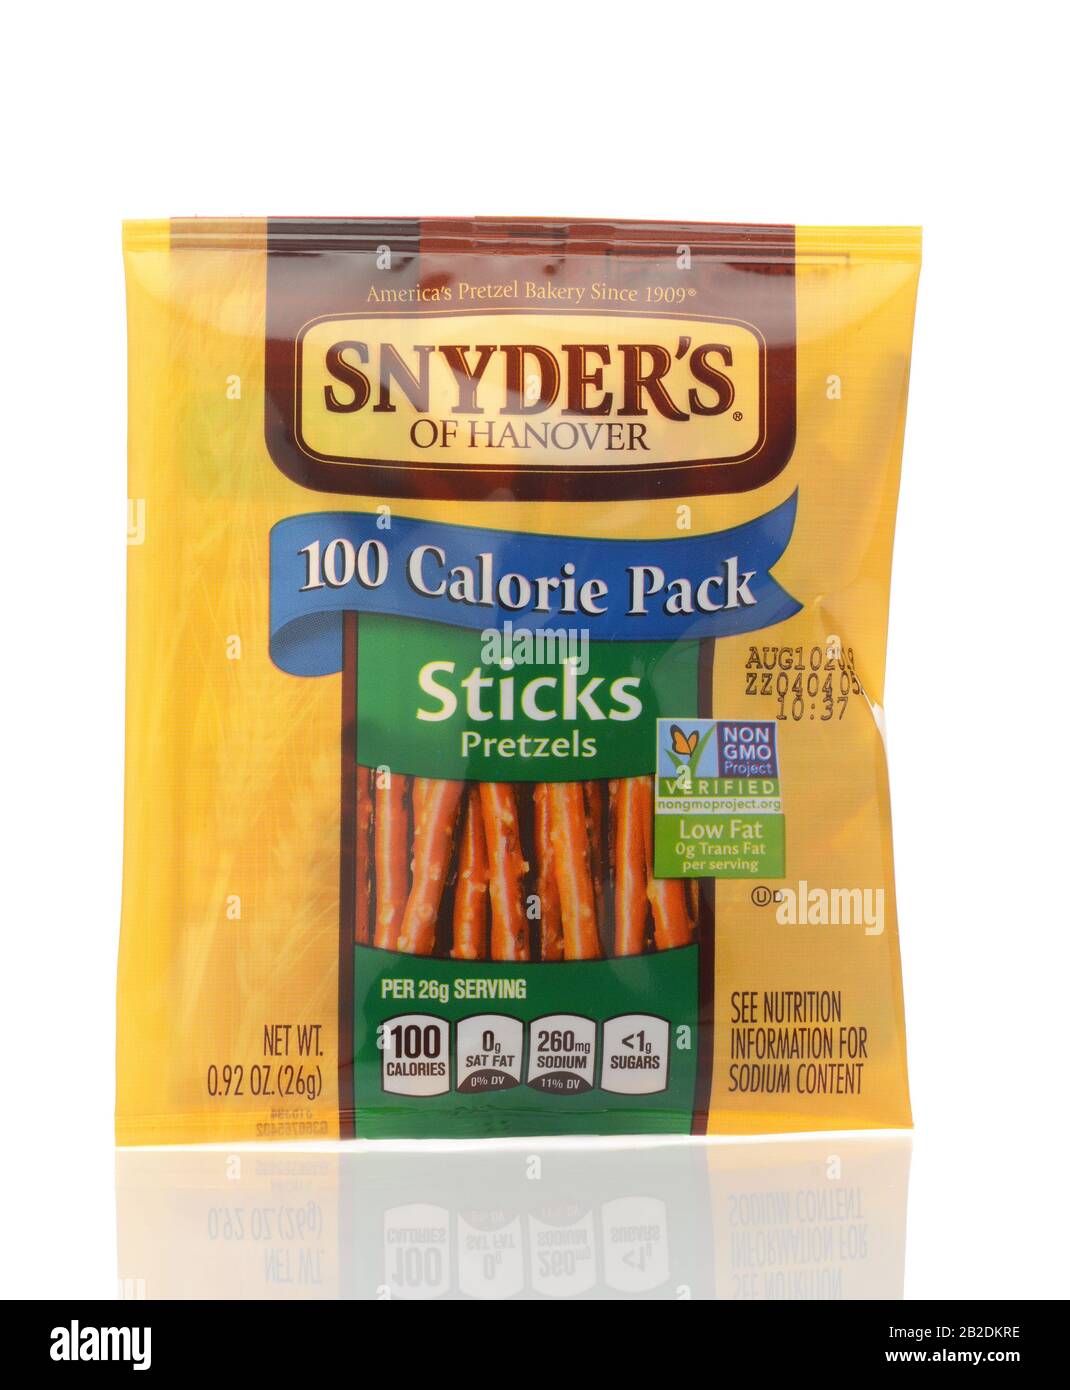 IRVINE, CALIFORNIA - MAY 22, 2019:  A package of Snyders of Hanover Pretzel Sticks. Stock Photo